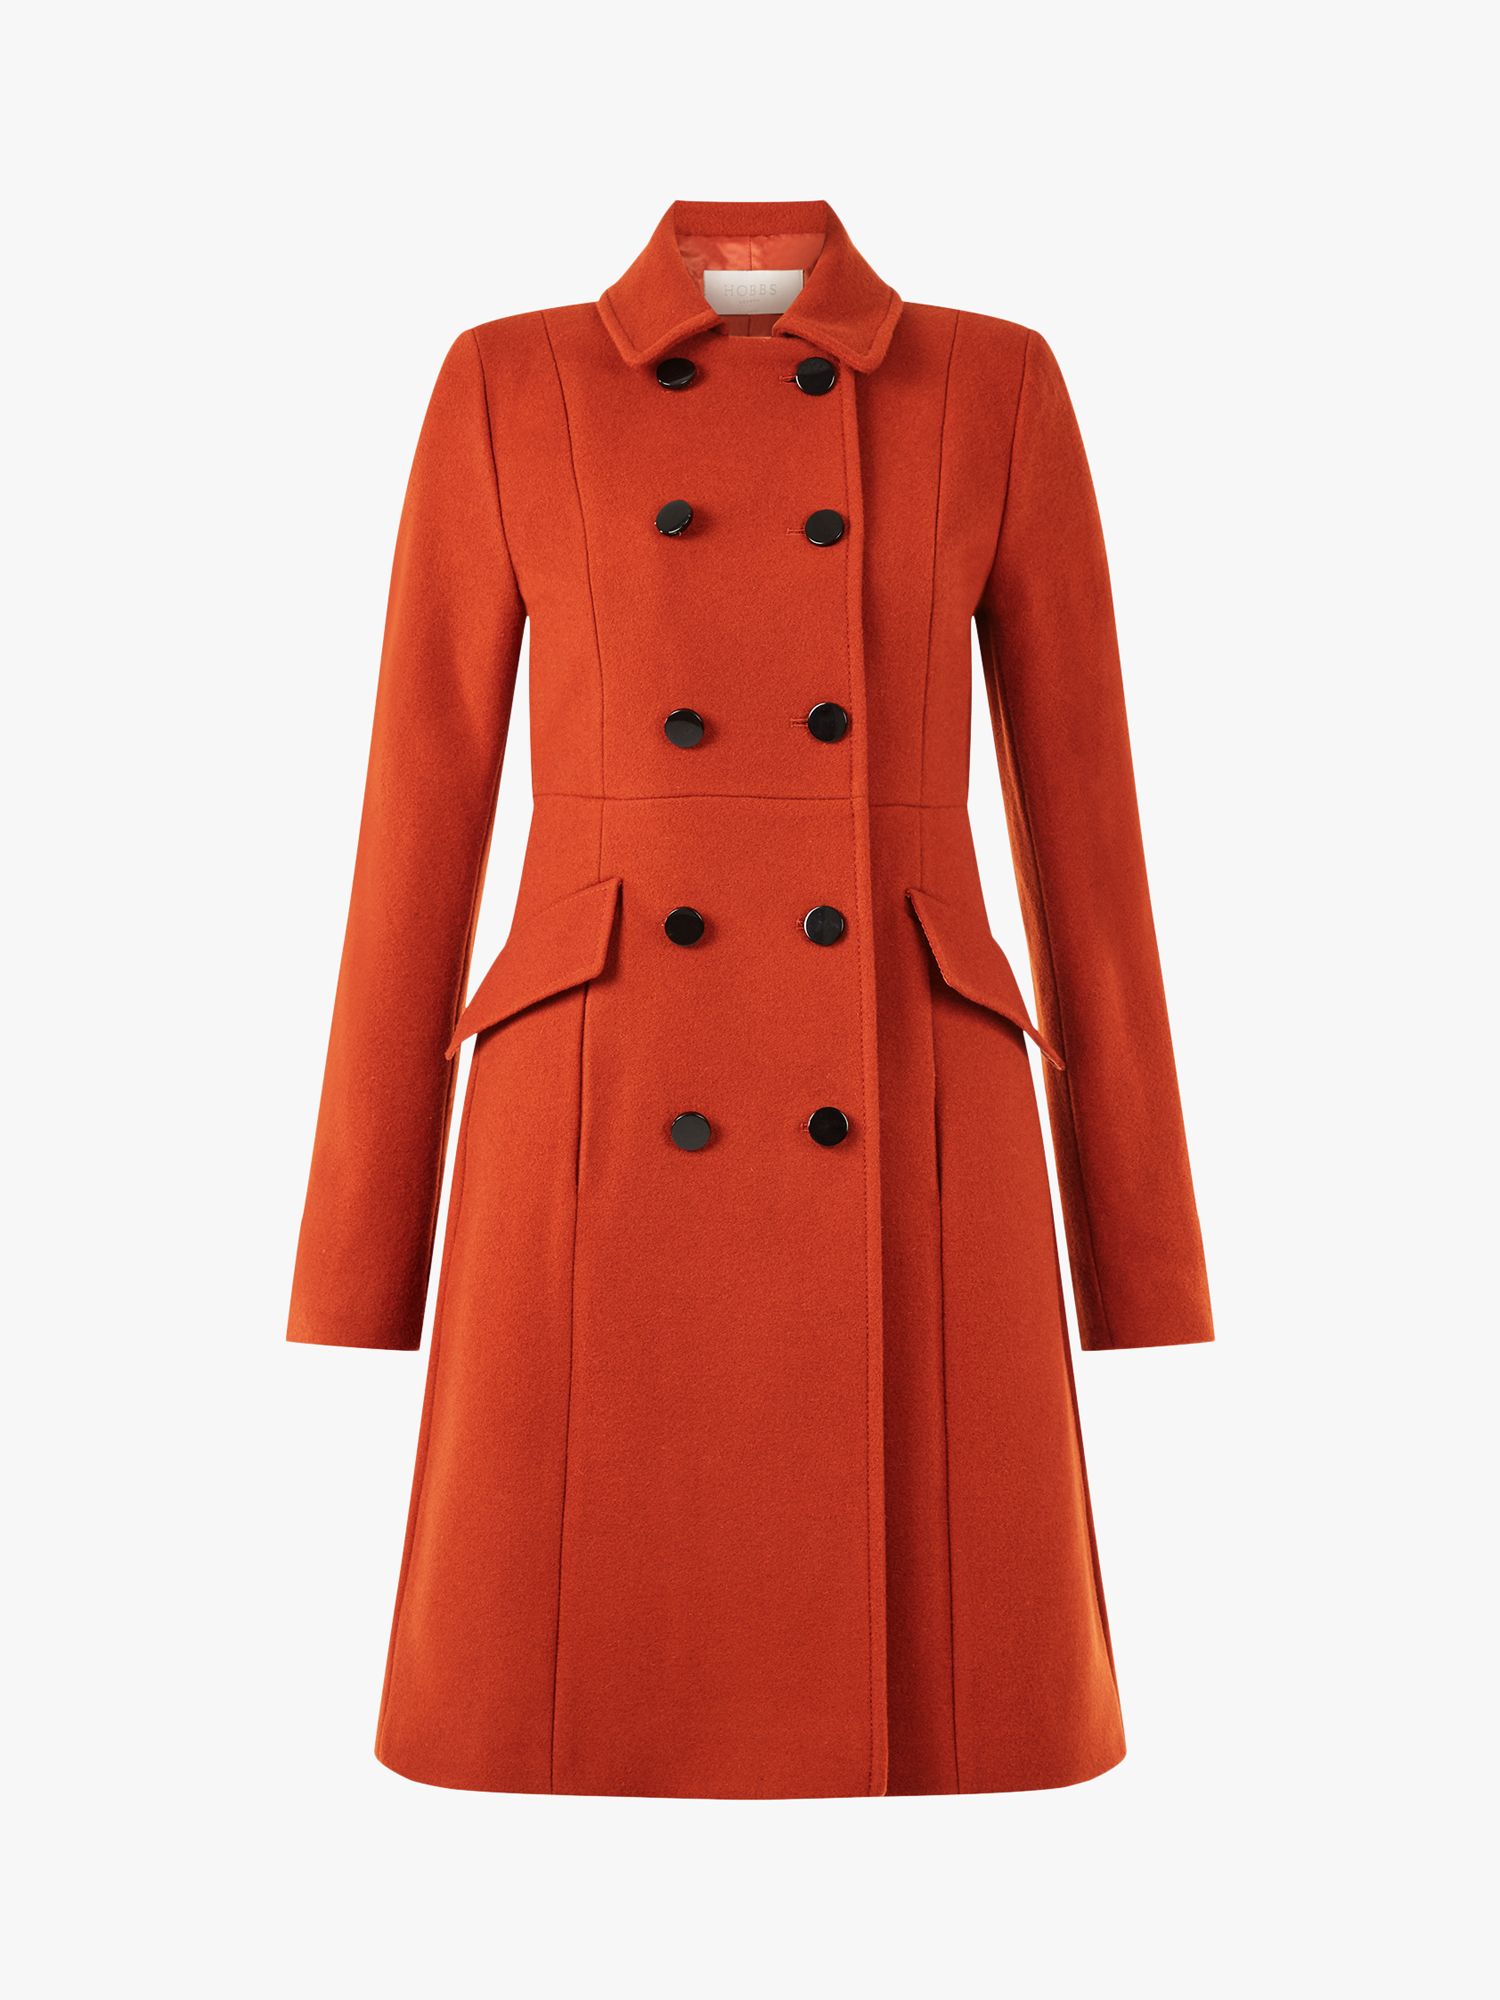 Wool Rich Double Breasted Tailored Coat, HOBBS